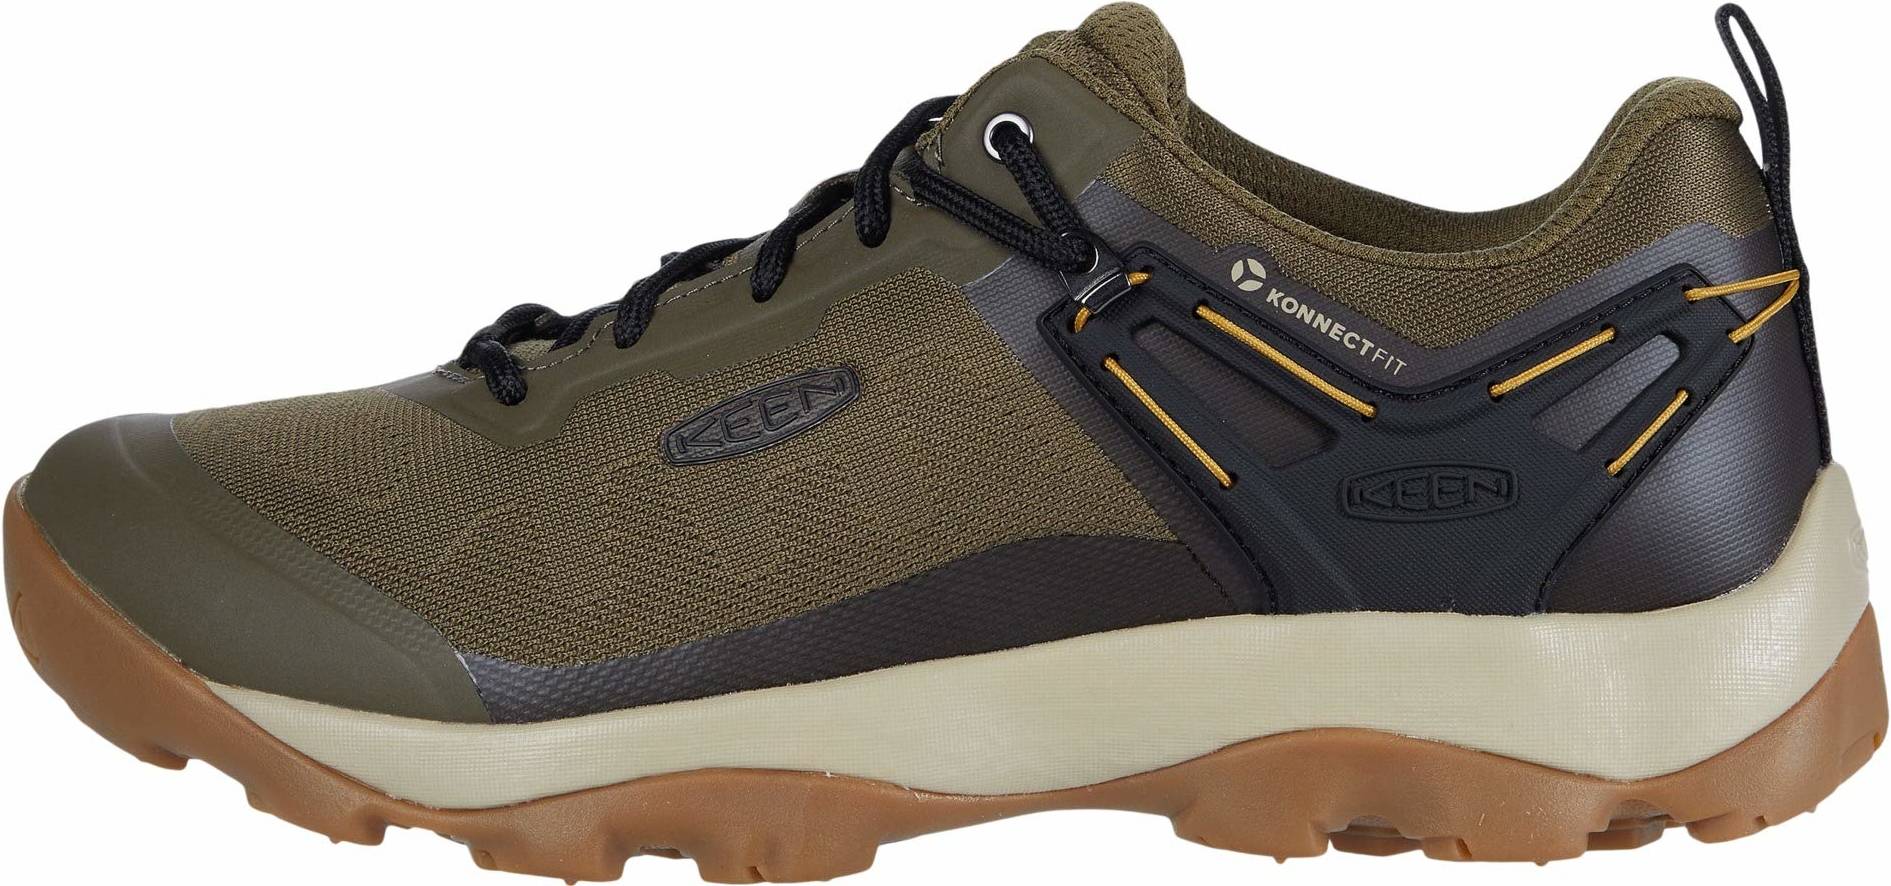 KEEN Venture Vent Lace Up Dark Olive Hiking Boots Shoes *MULTIPLE SIZES*